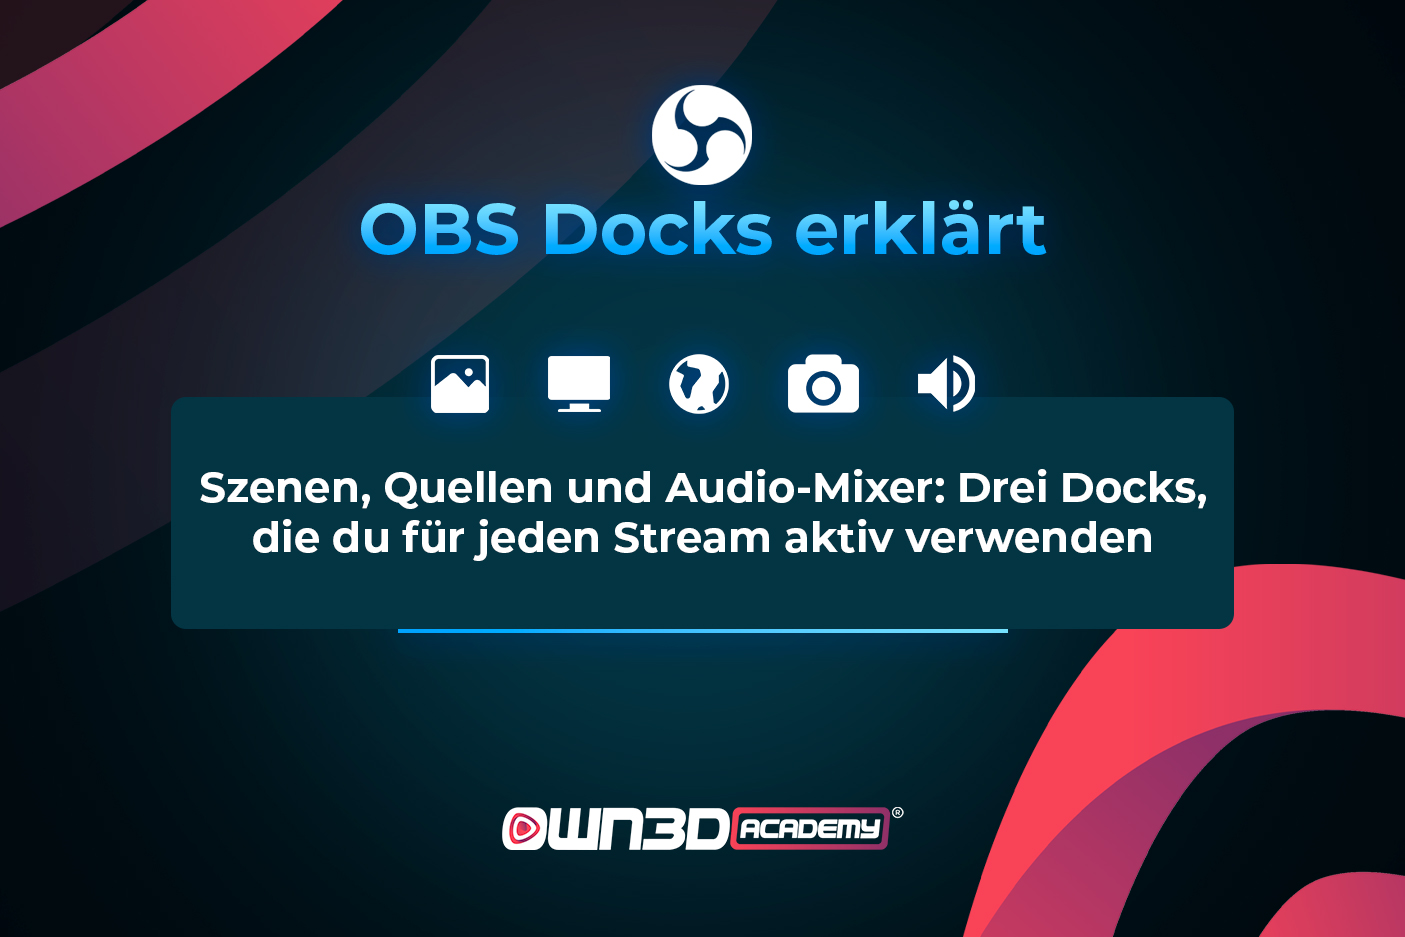 OBS-DOCKS-EXPLAINED_GER_Scenes-Sources-and-Audio-Mixer-standard-docks.jpg